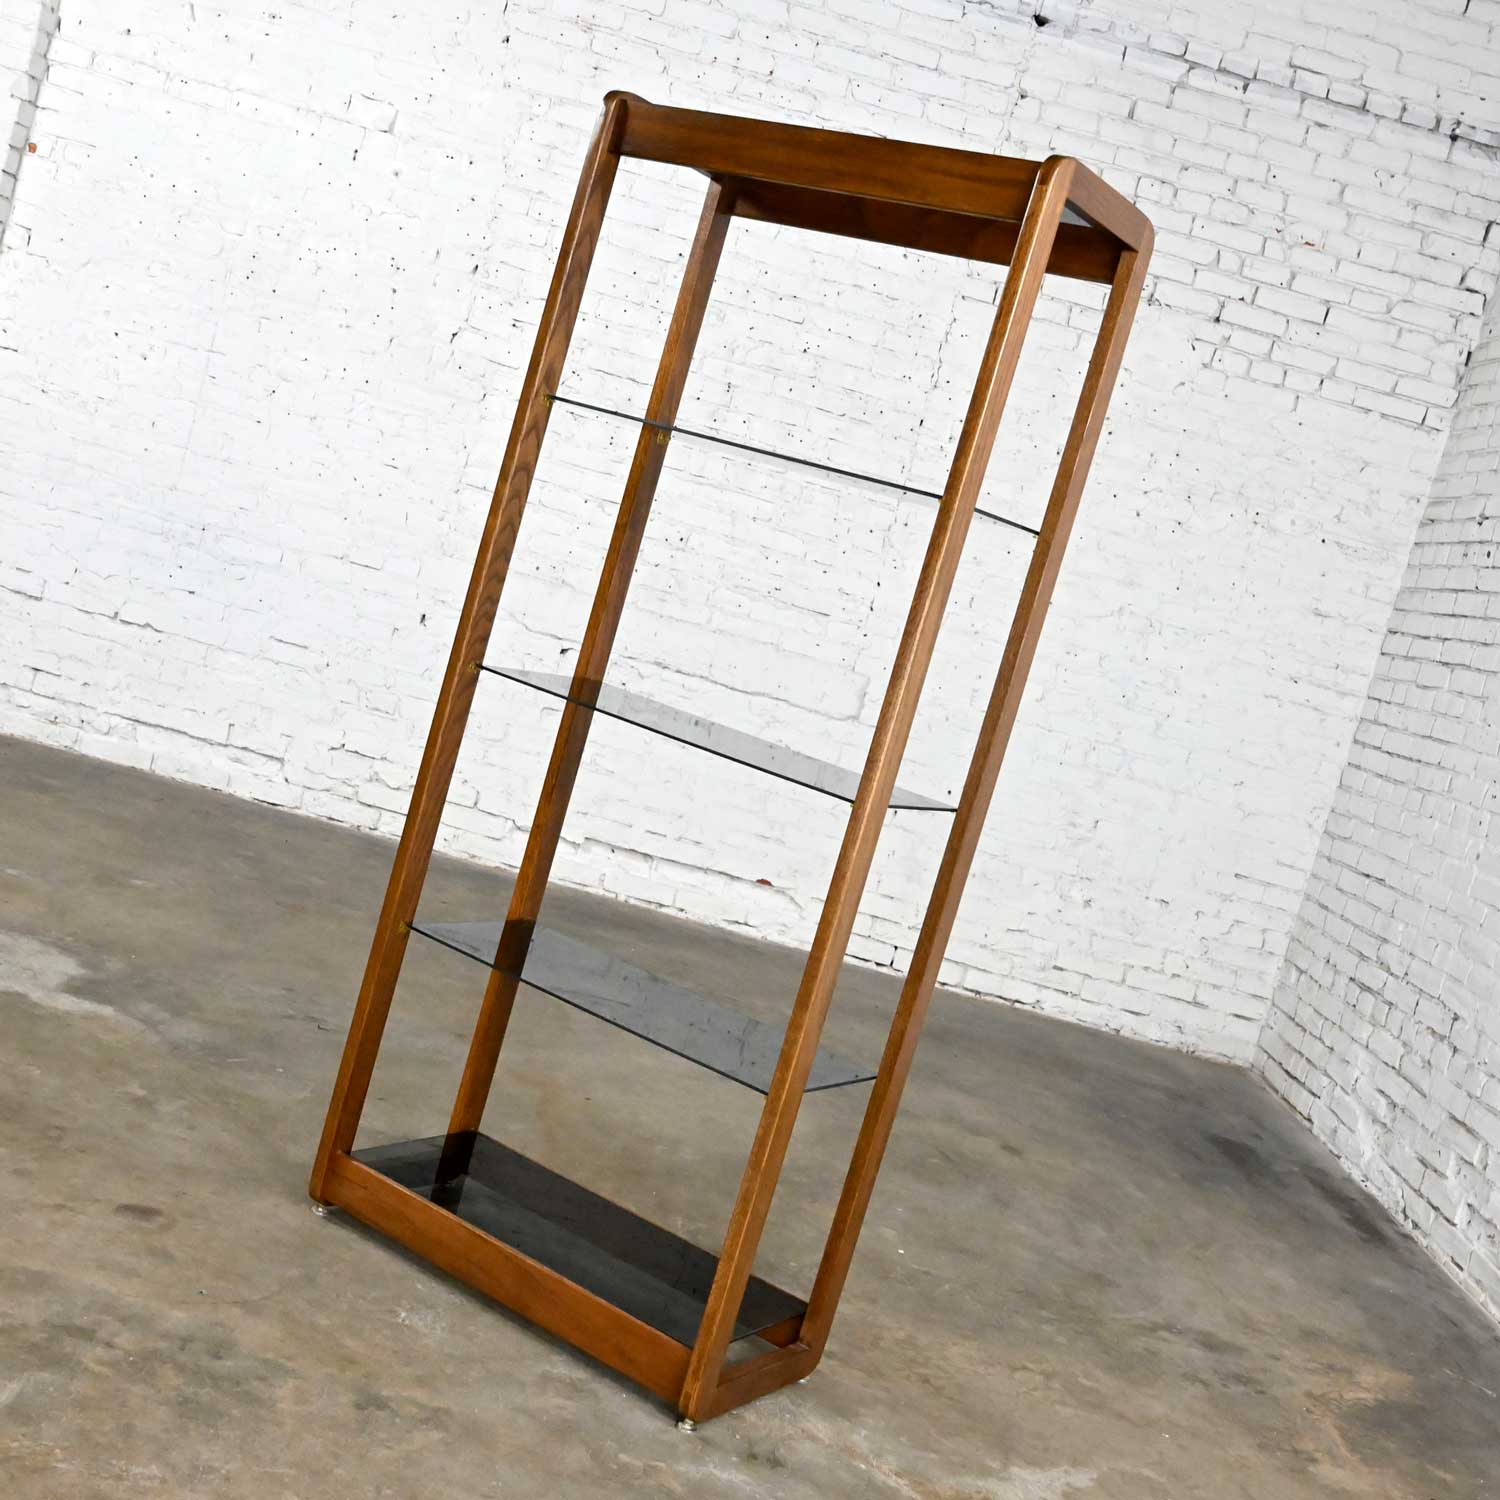 Vintage Mid-Century Modern Oak Frame & Smoked Glass Etagere Display Cabinet Bookcase